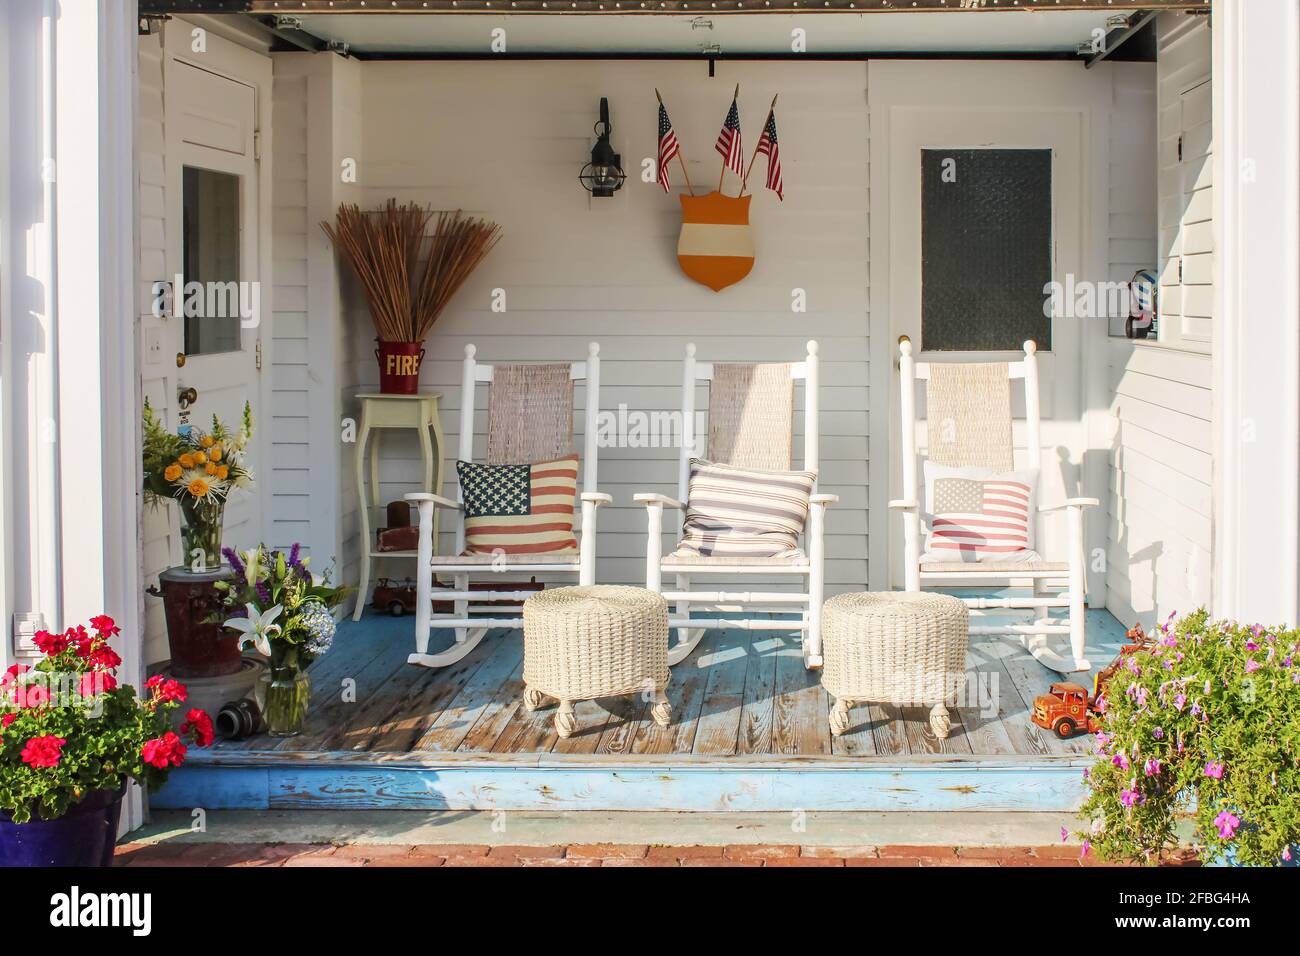 Fireman and patriotic themed worn wooden front porch in Cape Cod with three white rocking chairs and pillows and wicker foot stools and flags and pots Stock Photo